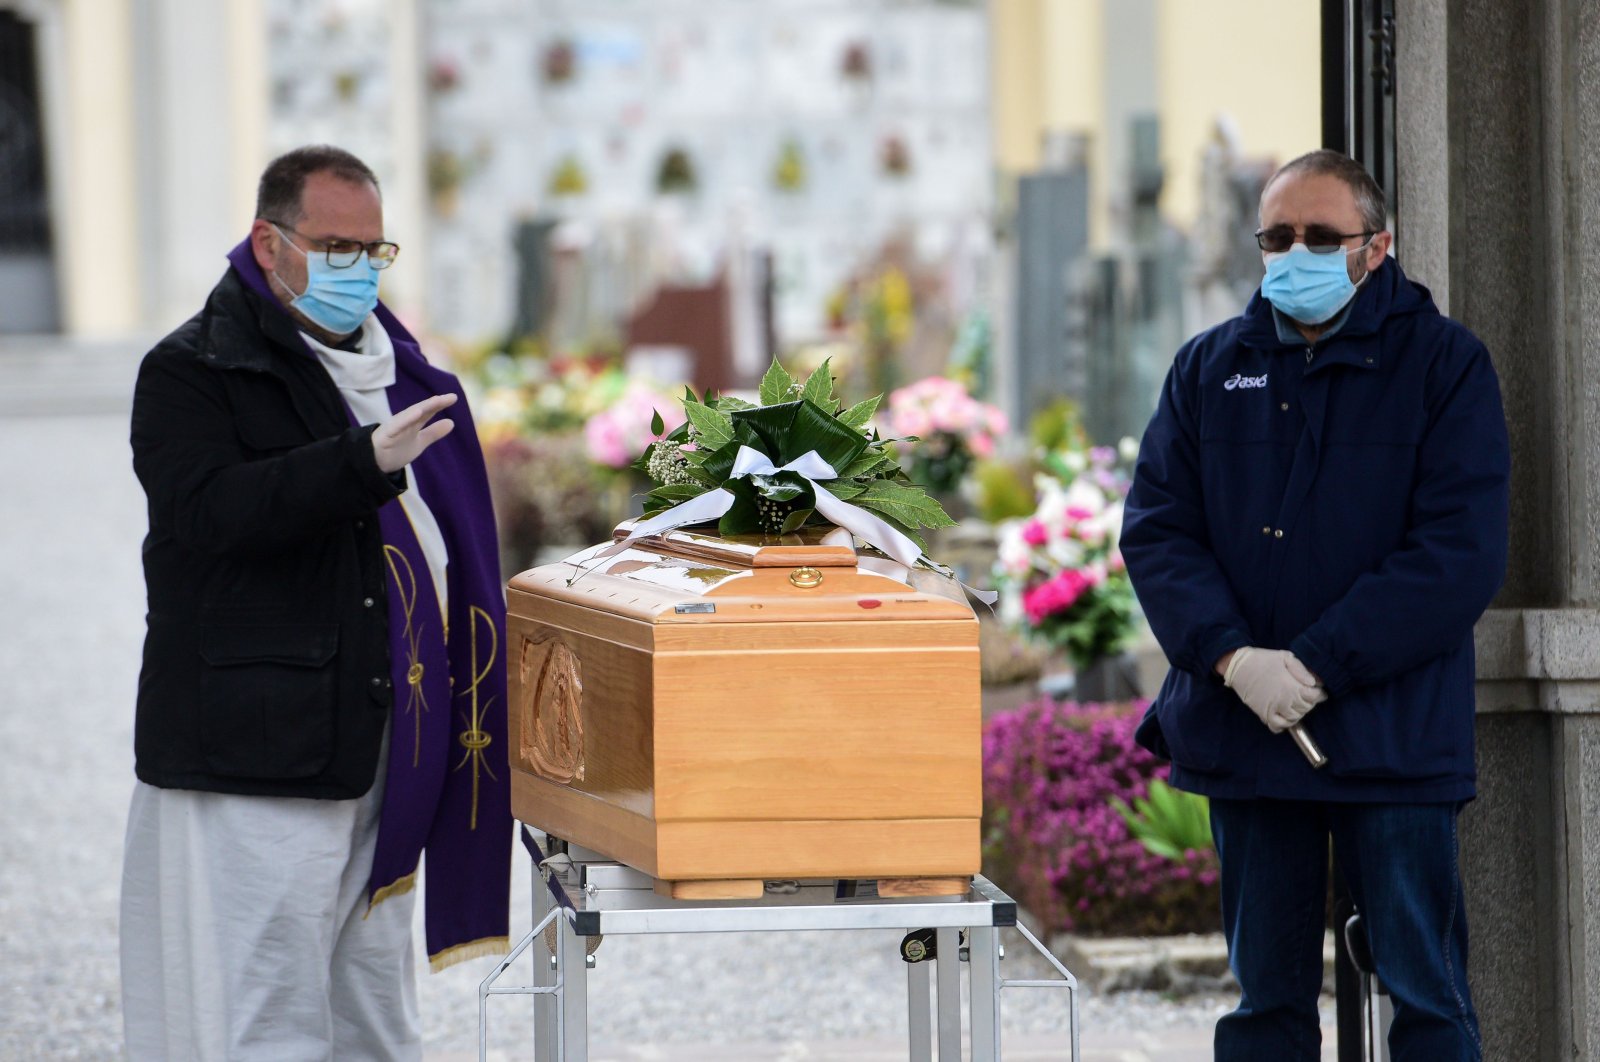 A priest (L), assisted by a pallbearer, both wearing a face mask, gives the last blessing to a deceased person, by a coffin during a funeral service at the cemetery of Bolgare, Lombardy, on March 23, 2020 during the COVID-19 new coronavirus pandemic. (AFP Photo)